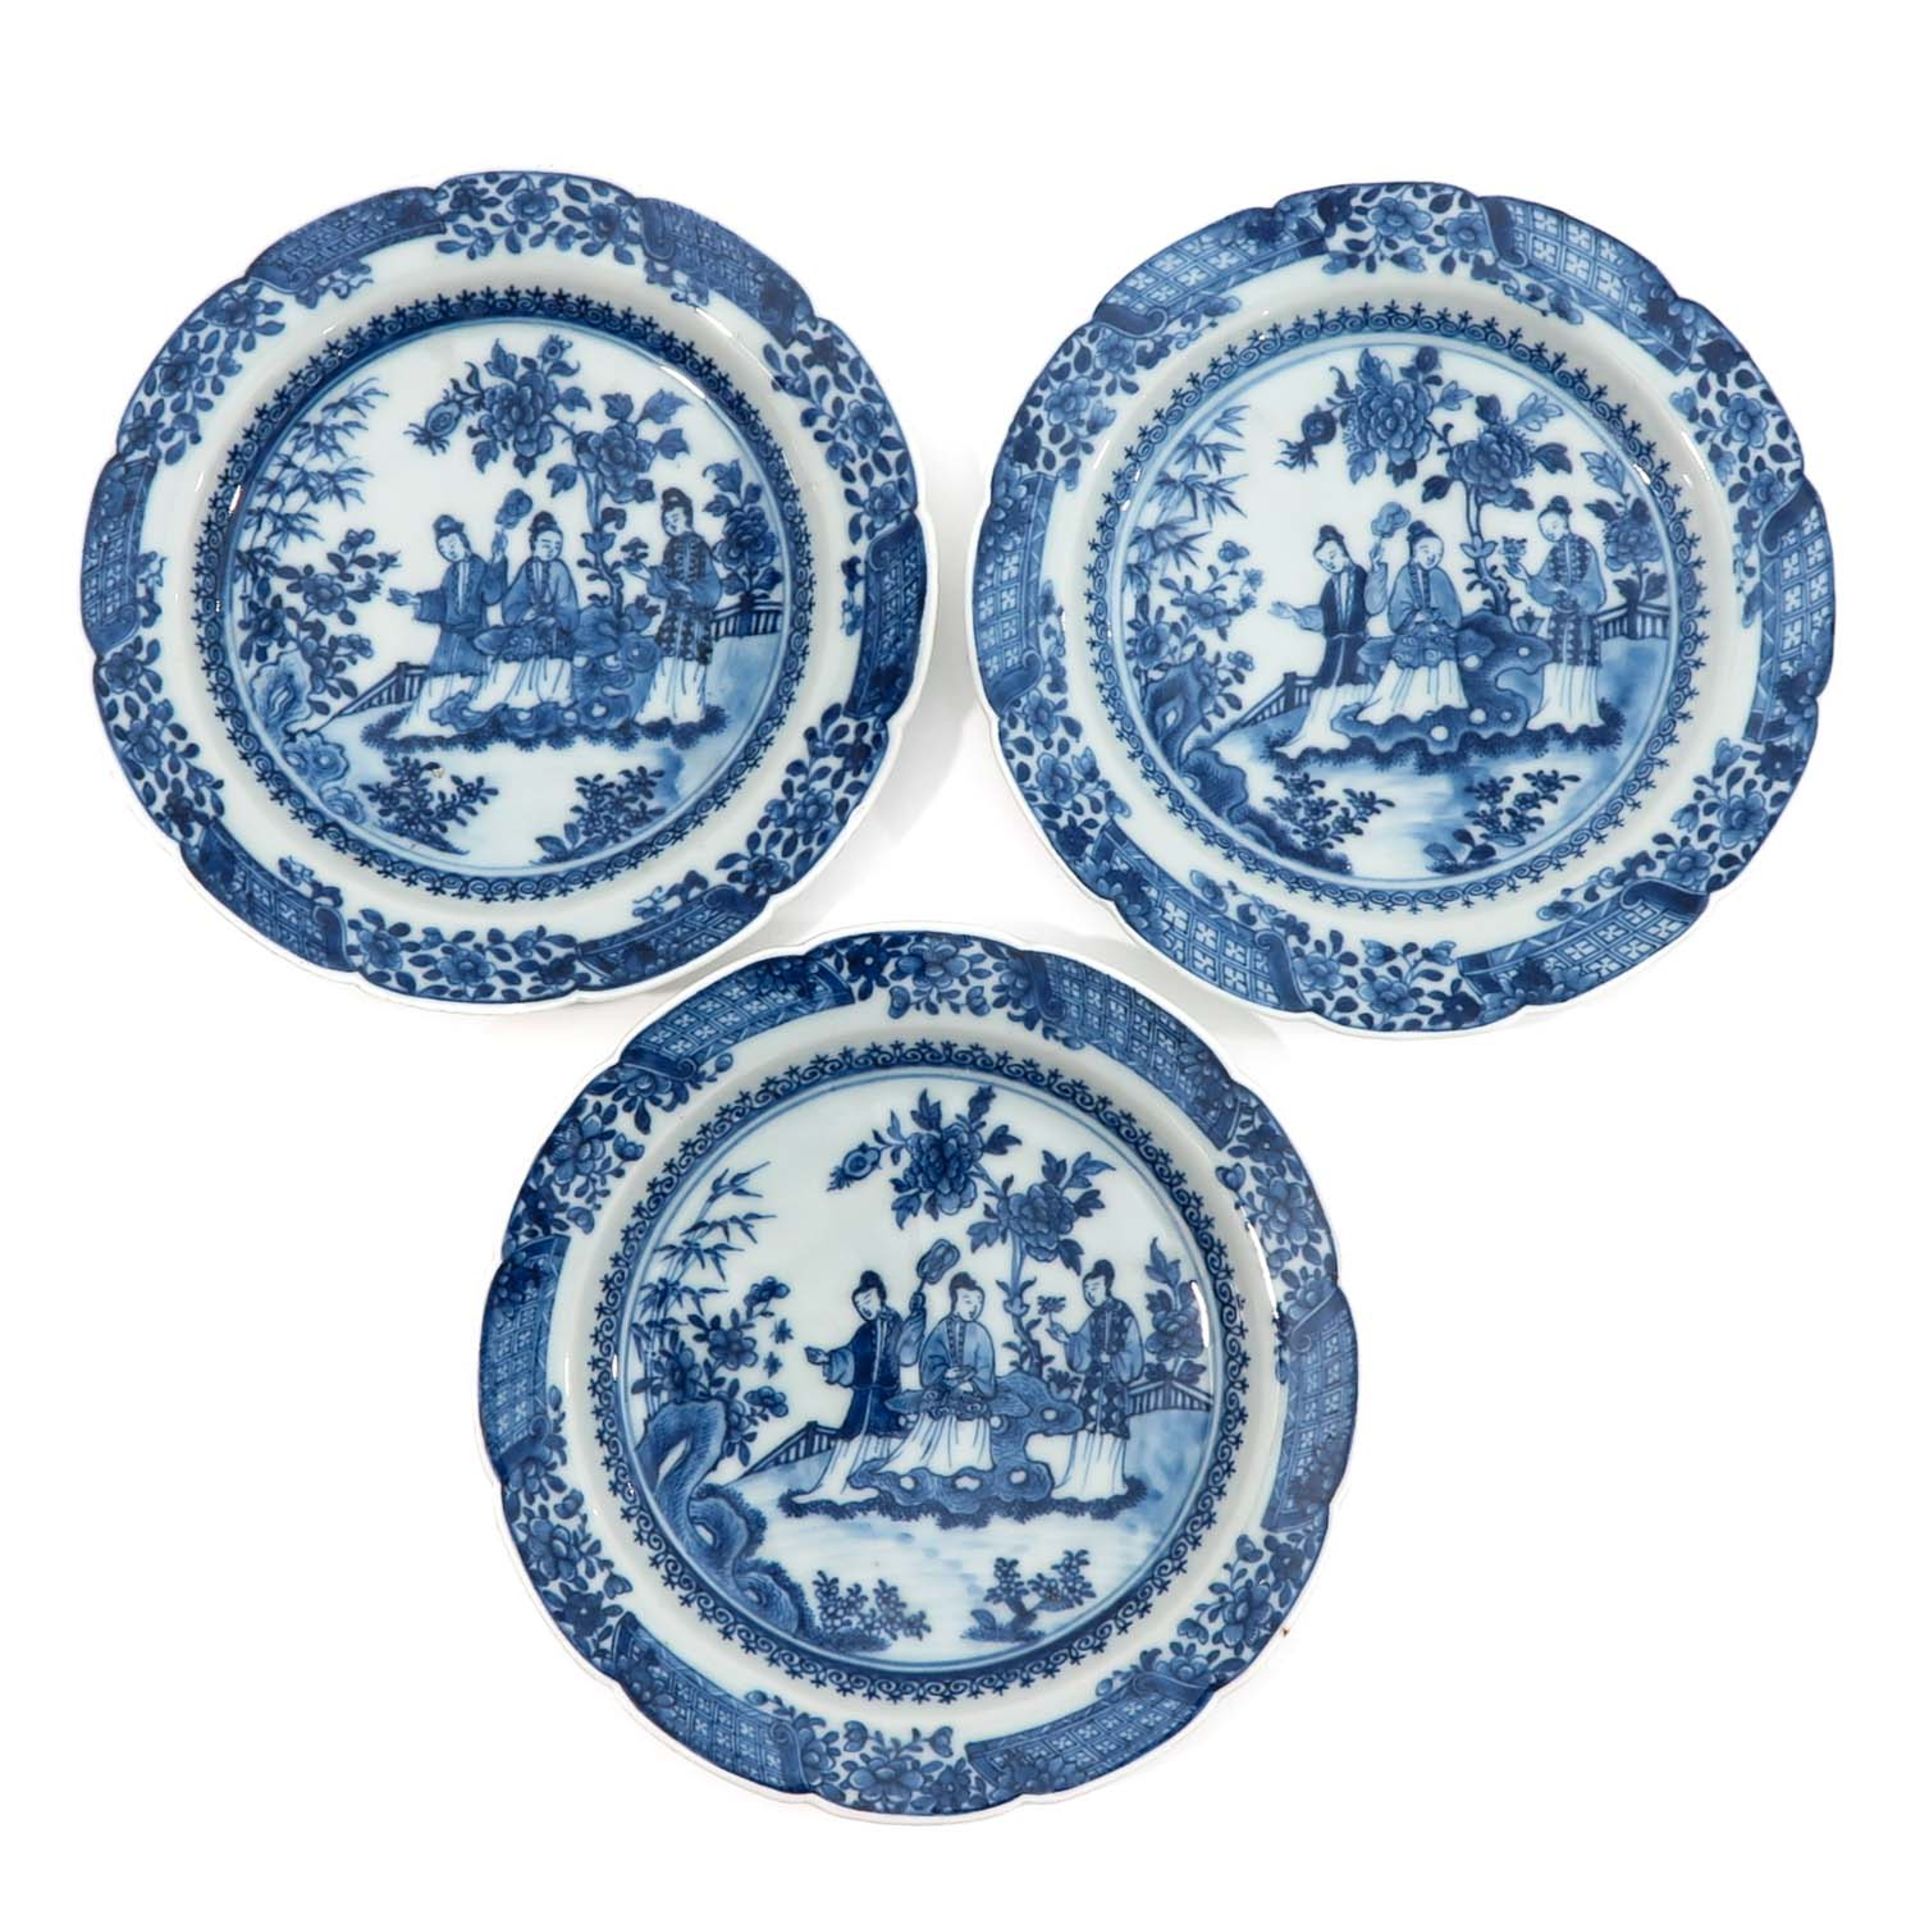 A Series of 3 Small Blue and White Plates